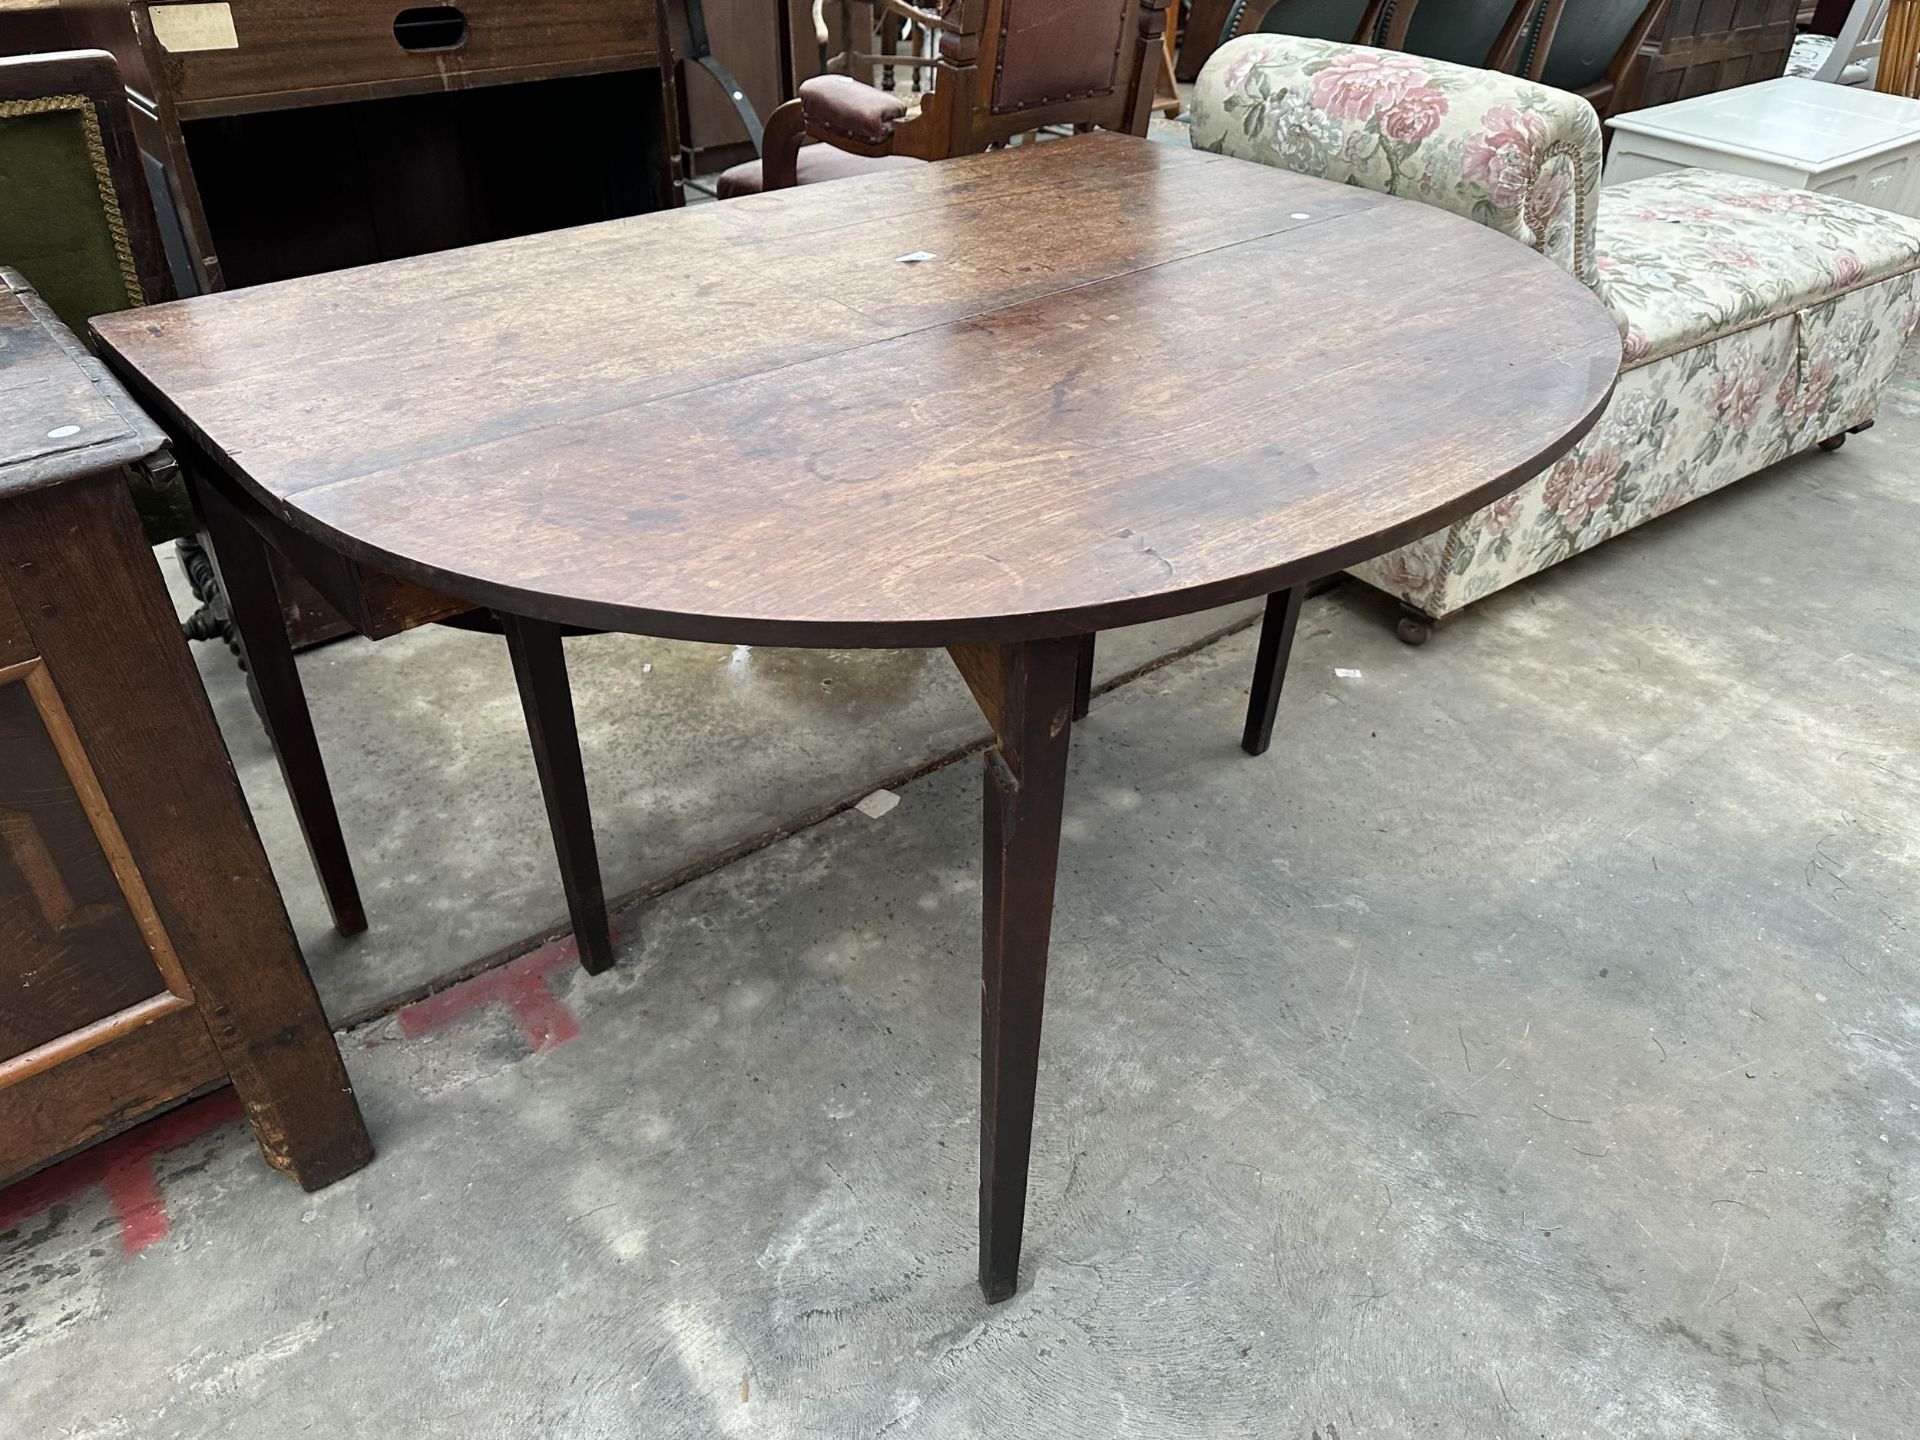 A 19TH CENTURY MAHOGANY DROP-LEAF DINING TABLE, 57 X 49" OPENED - Image 4 of 6